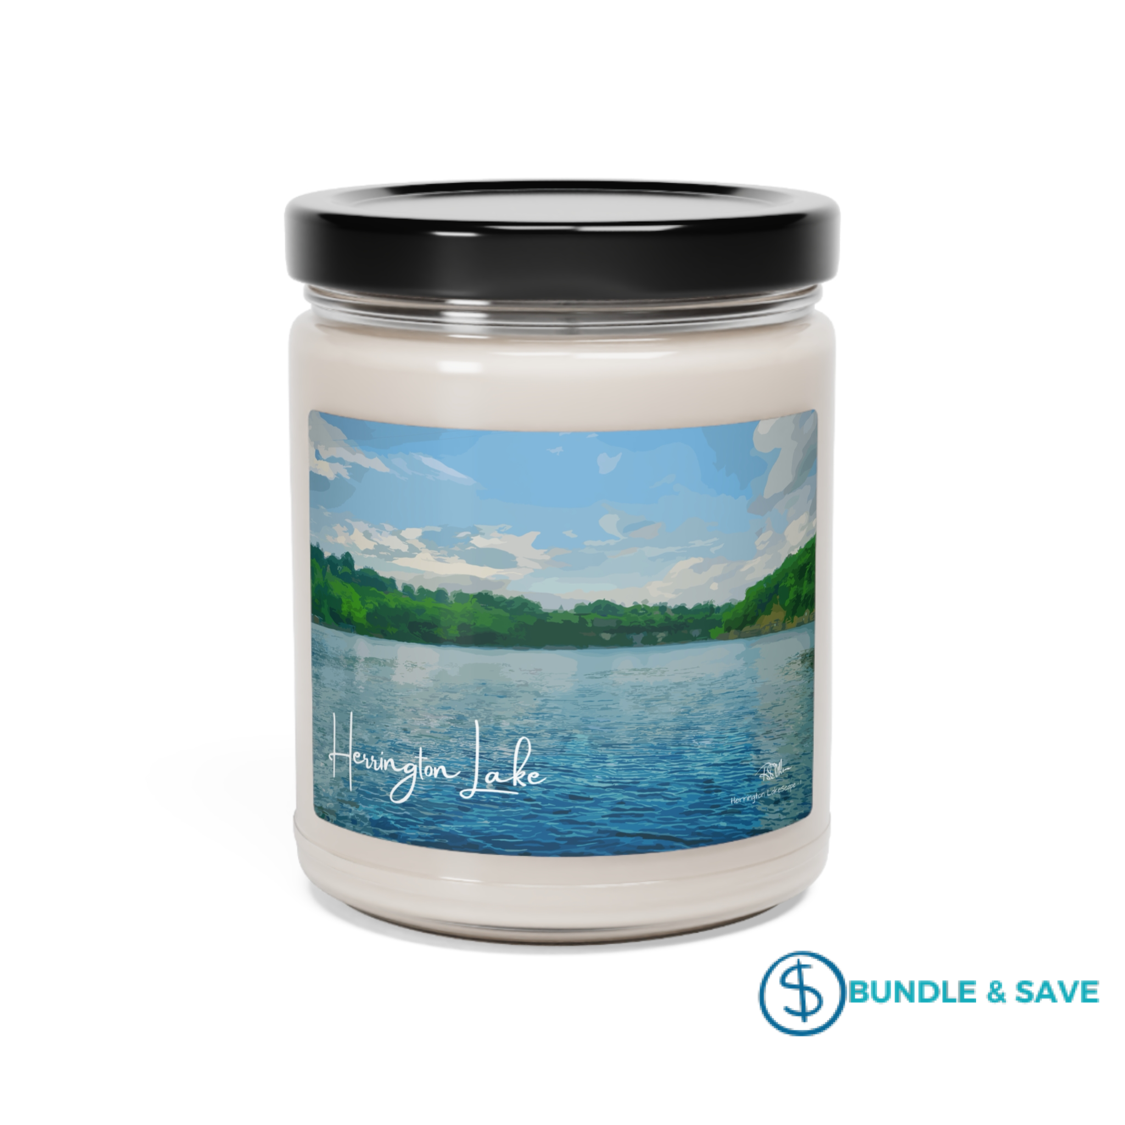 "Herrington LakeScape - 1" Scented Soy Candle, 9oz